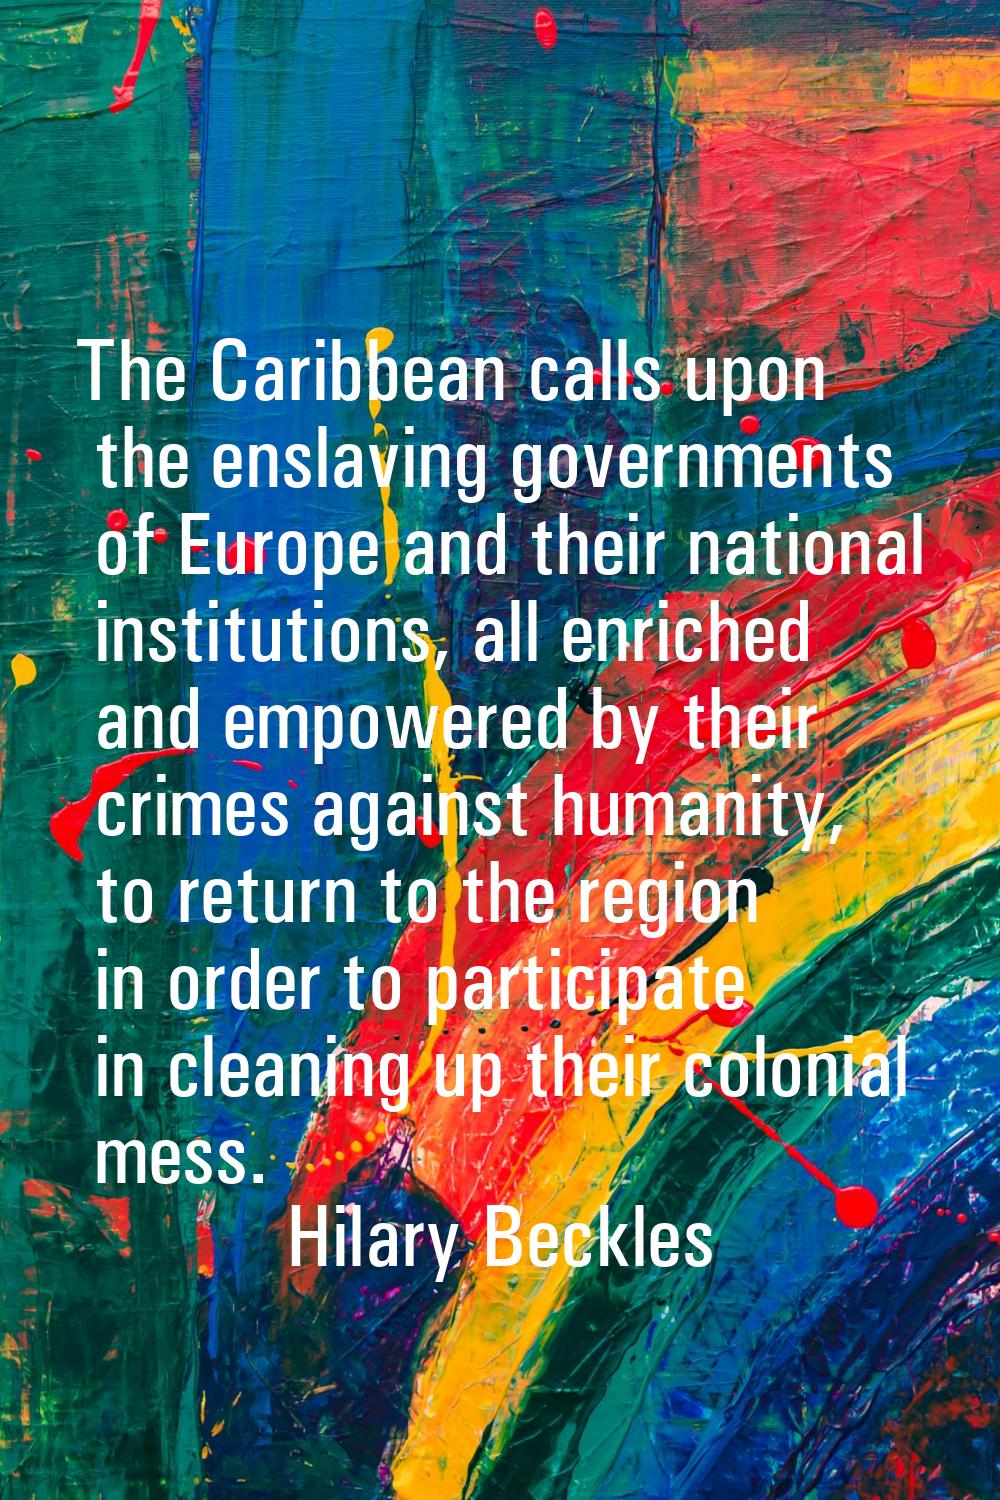 The Caribbean calls upon the enslaving governments of Europe and their national institutions, all e